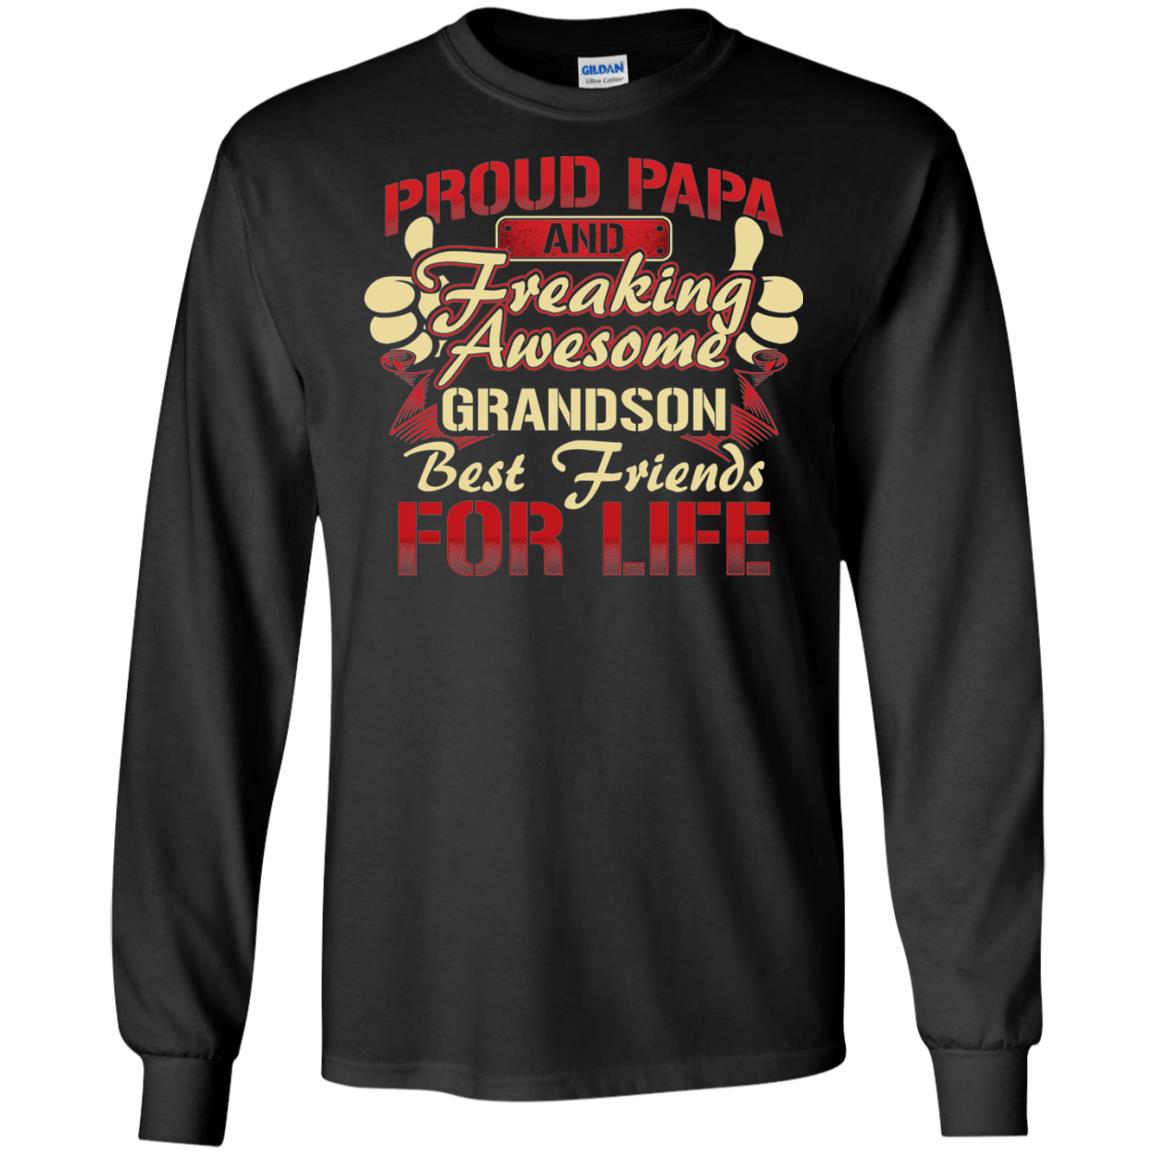 Proud Papa And Freaking Awesome Grandson Best Friends For Life Shirt